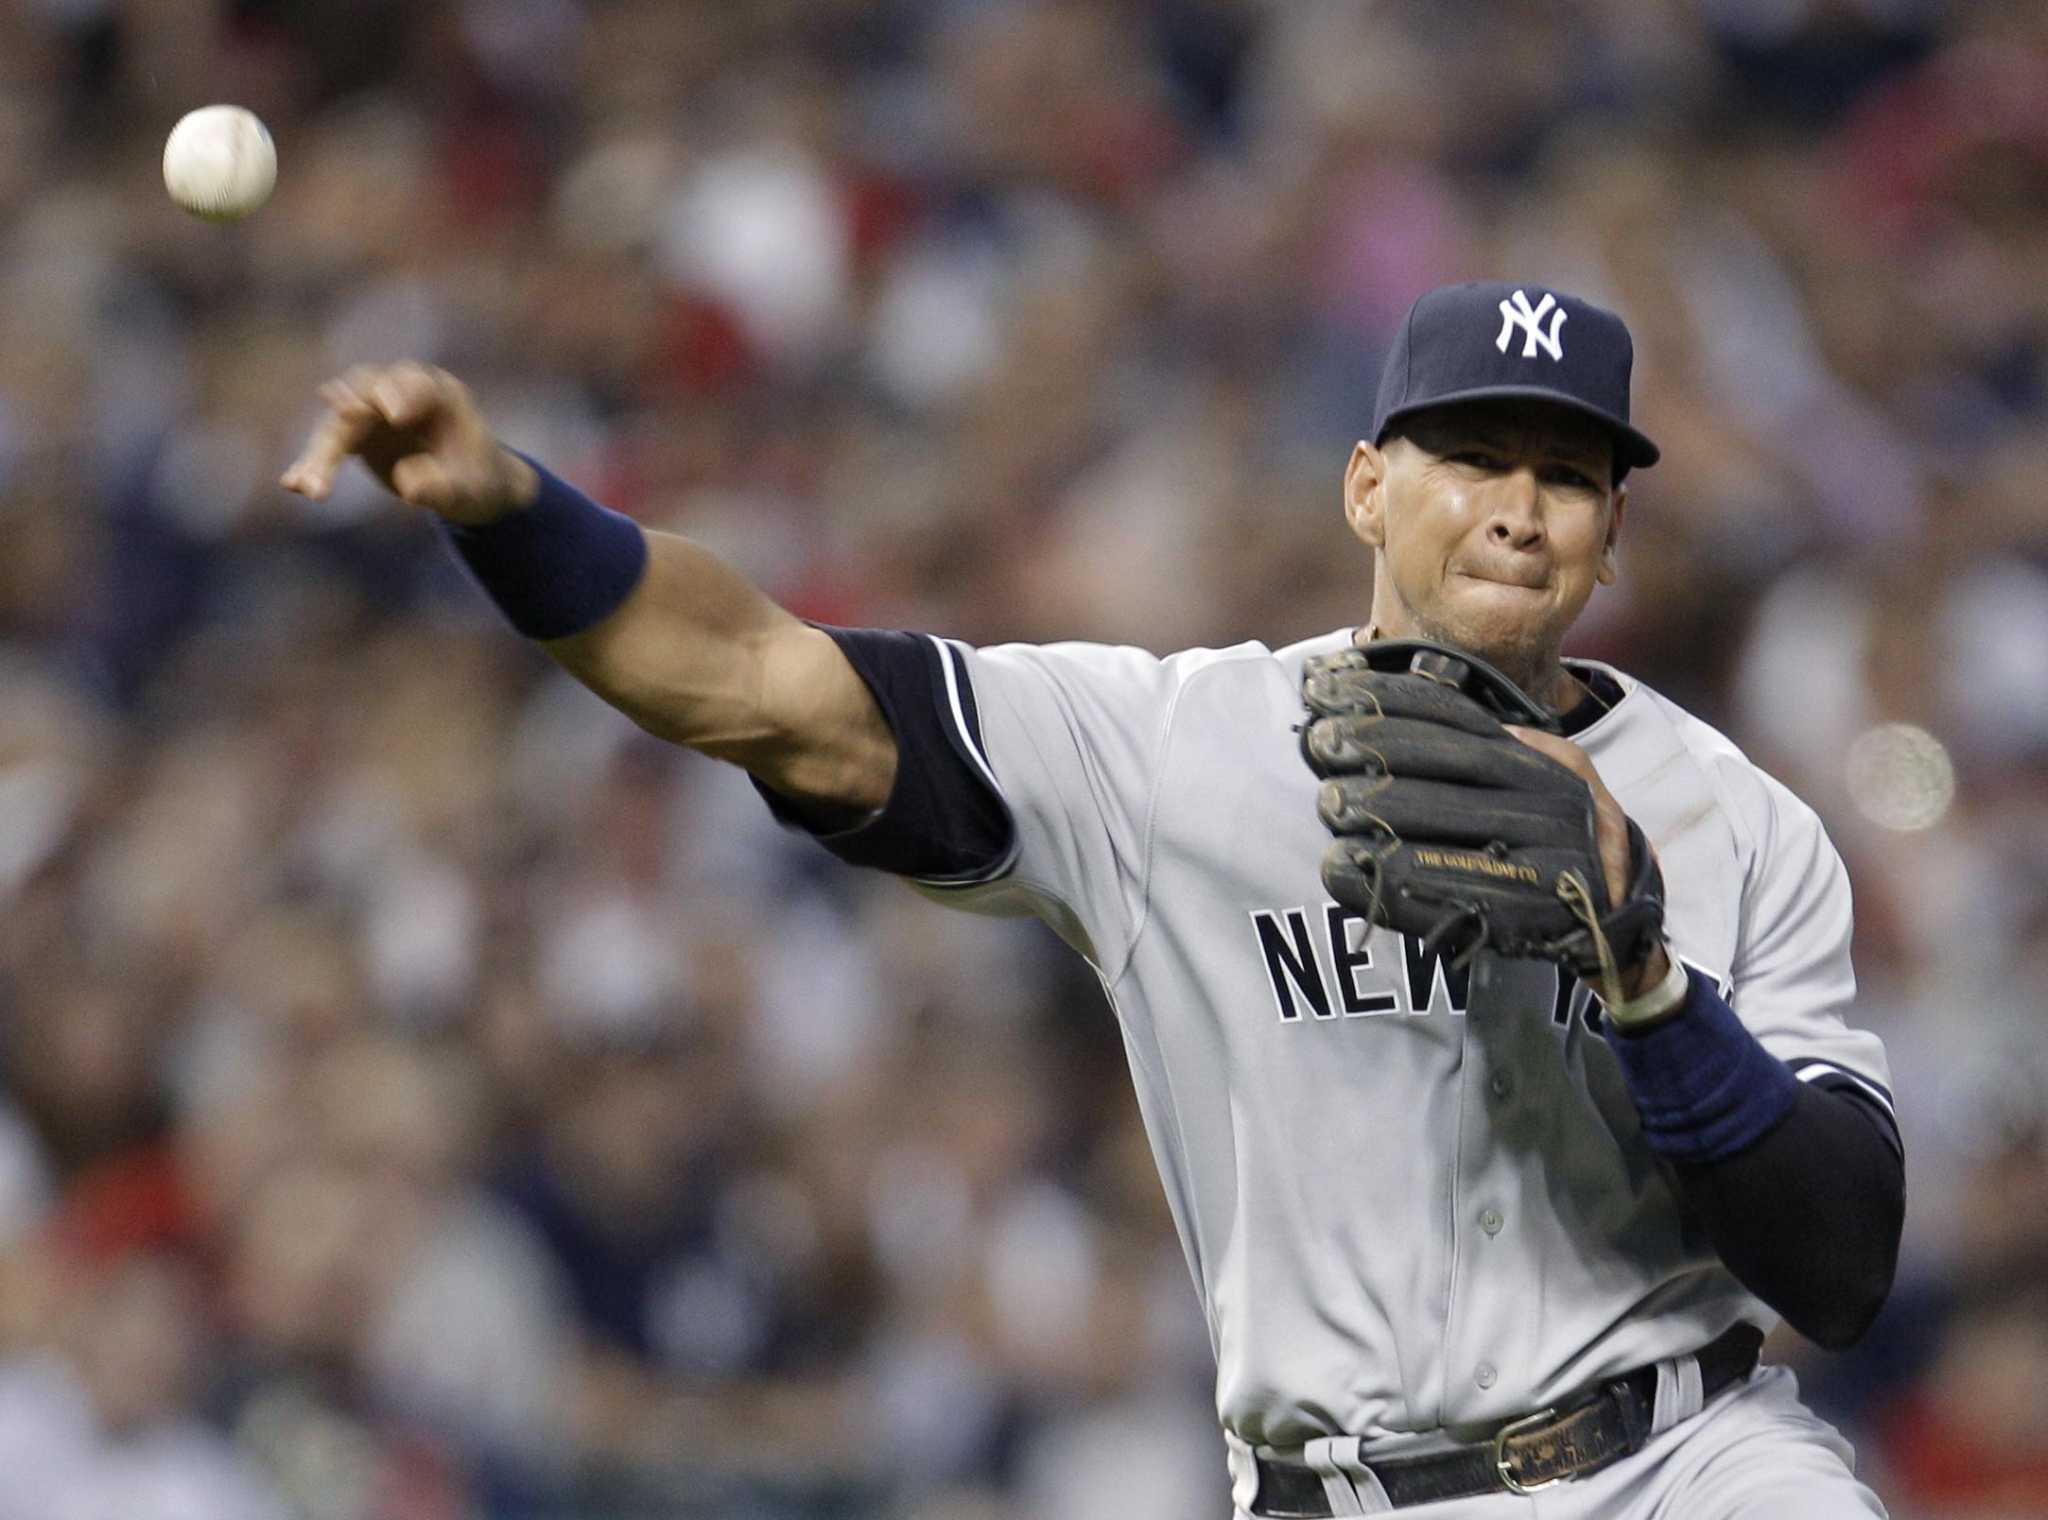 Yankees' Alex Rodriguez will miss 4-6 weeks after knee surgery